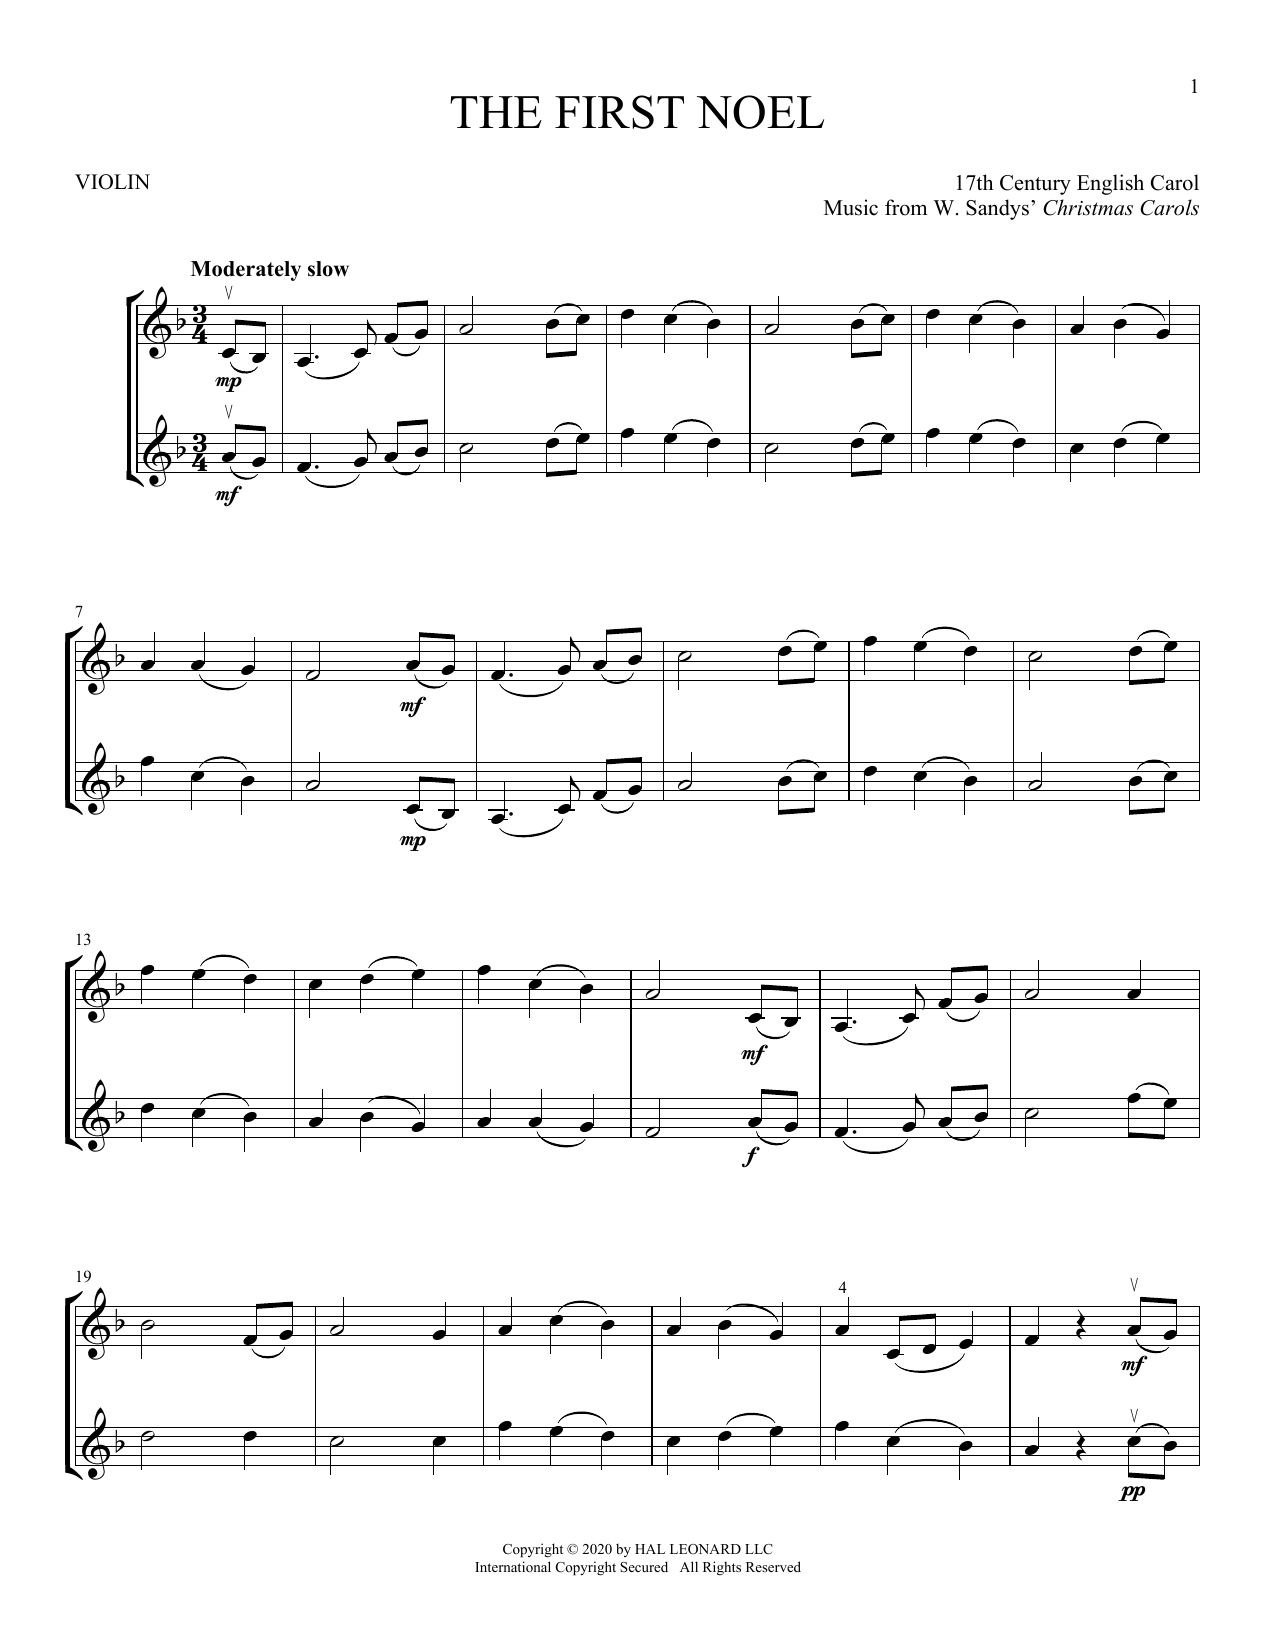 17th Century English Carol The First Noel sheet music notes and chords. Download Printable PDF.